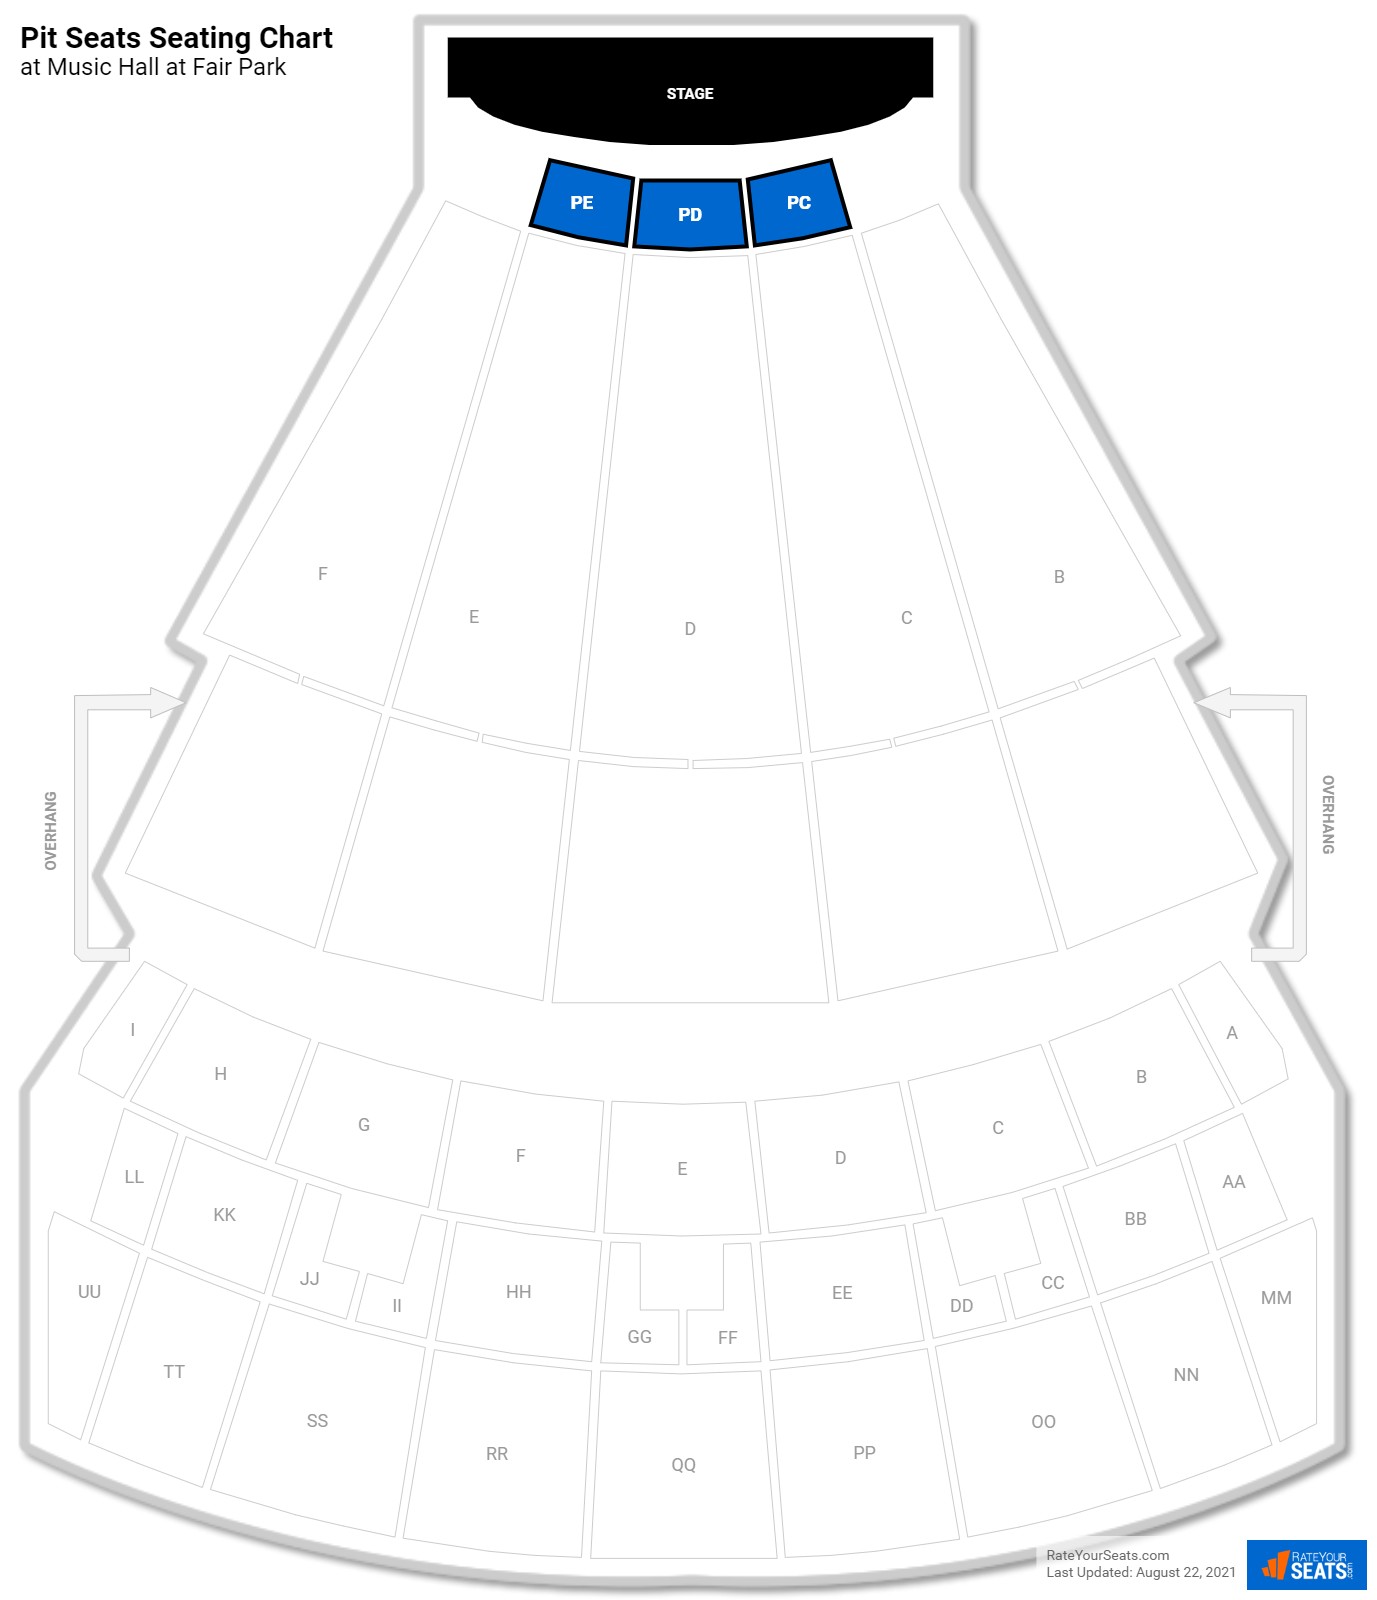 Theater Pit Seats Seating Chart at Music Hall at Fair Park